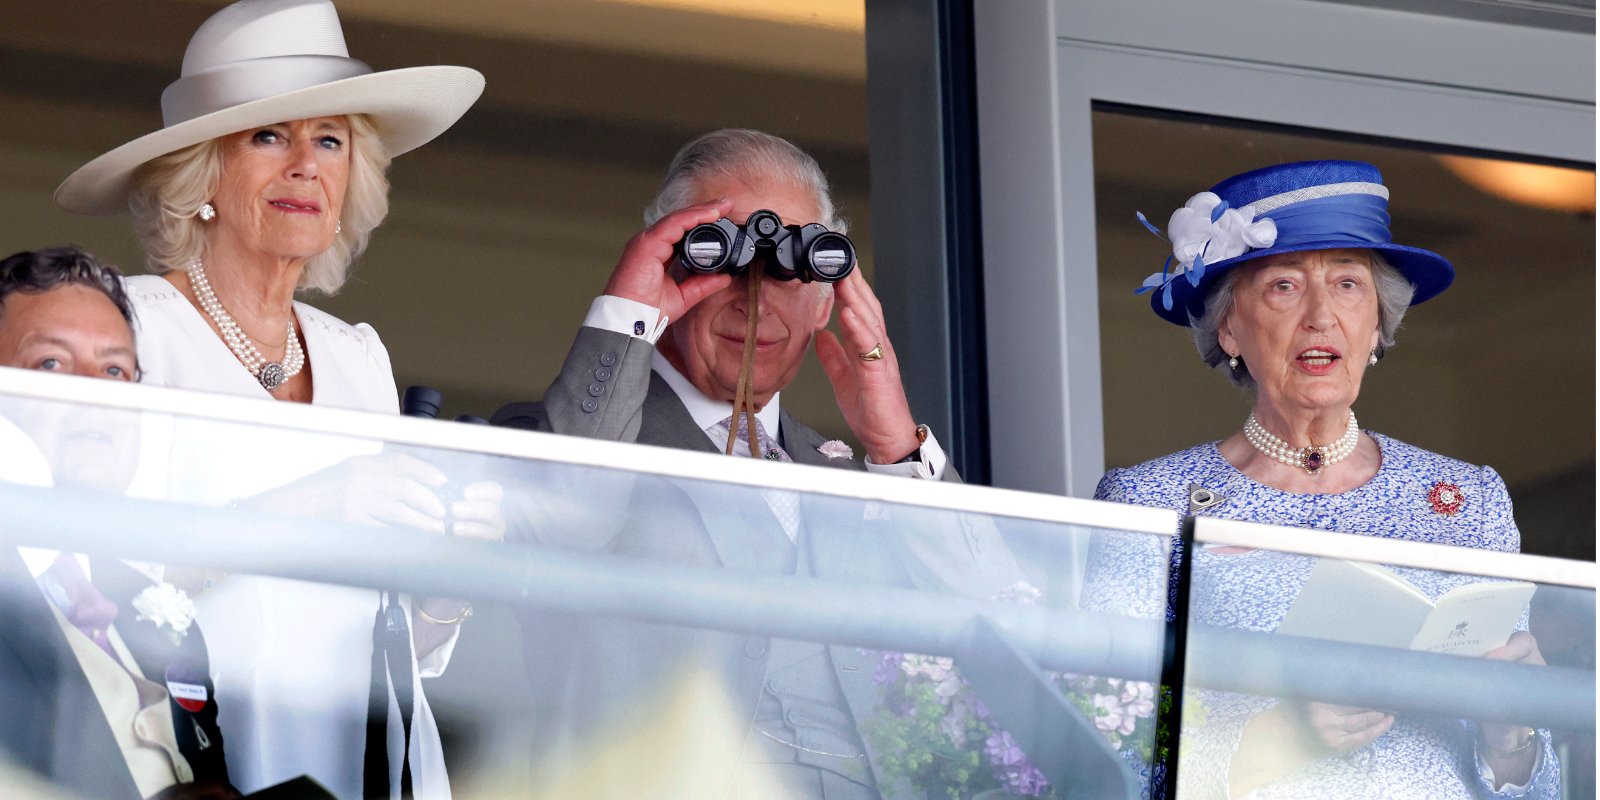 Camilla Parker Bowles, King Charles III and Lady Susan Hussey (Lady-in-waiting to Queen Elizabeth II) watch the racing as they attend day 2 of Royal Ascot at Ascot Racecourse on June 15, 2022.